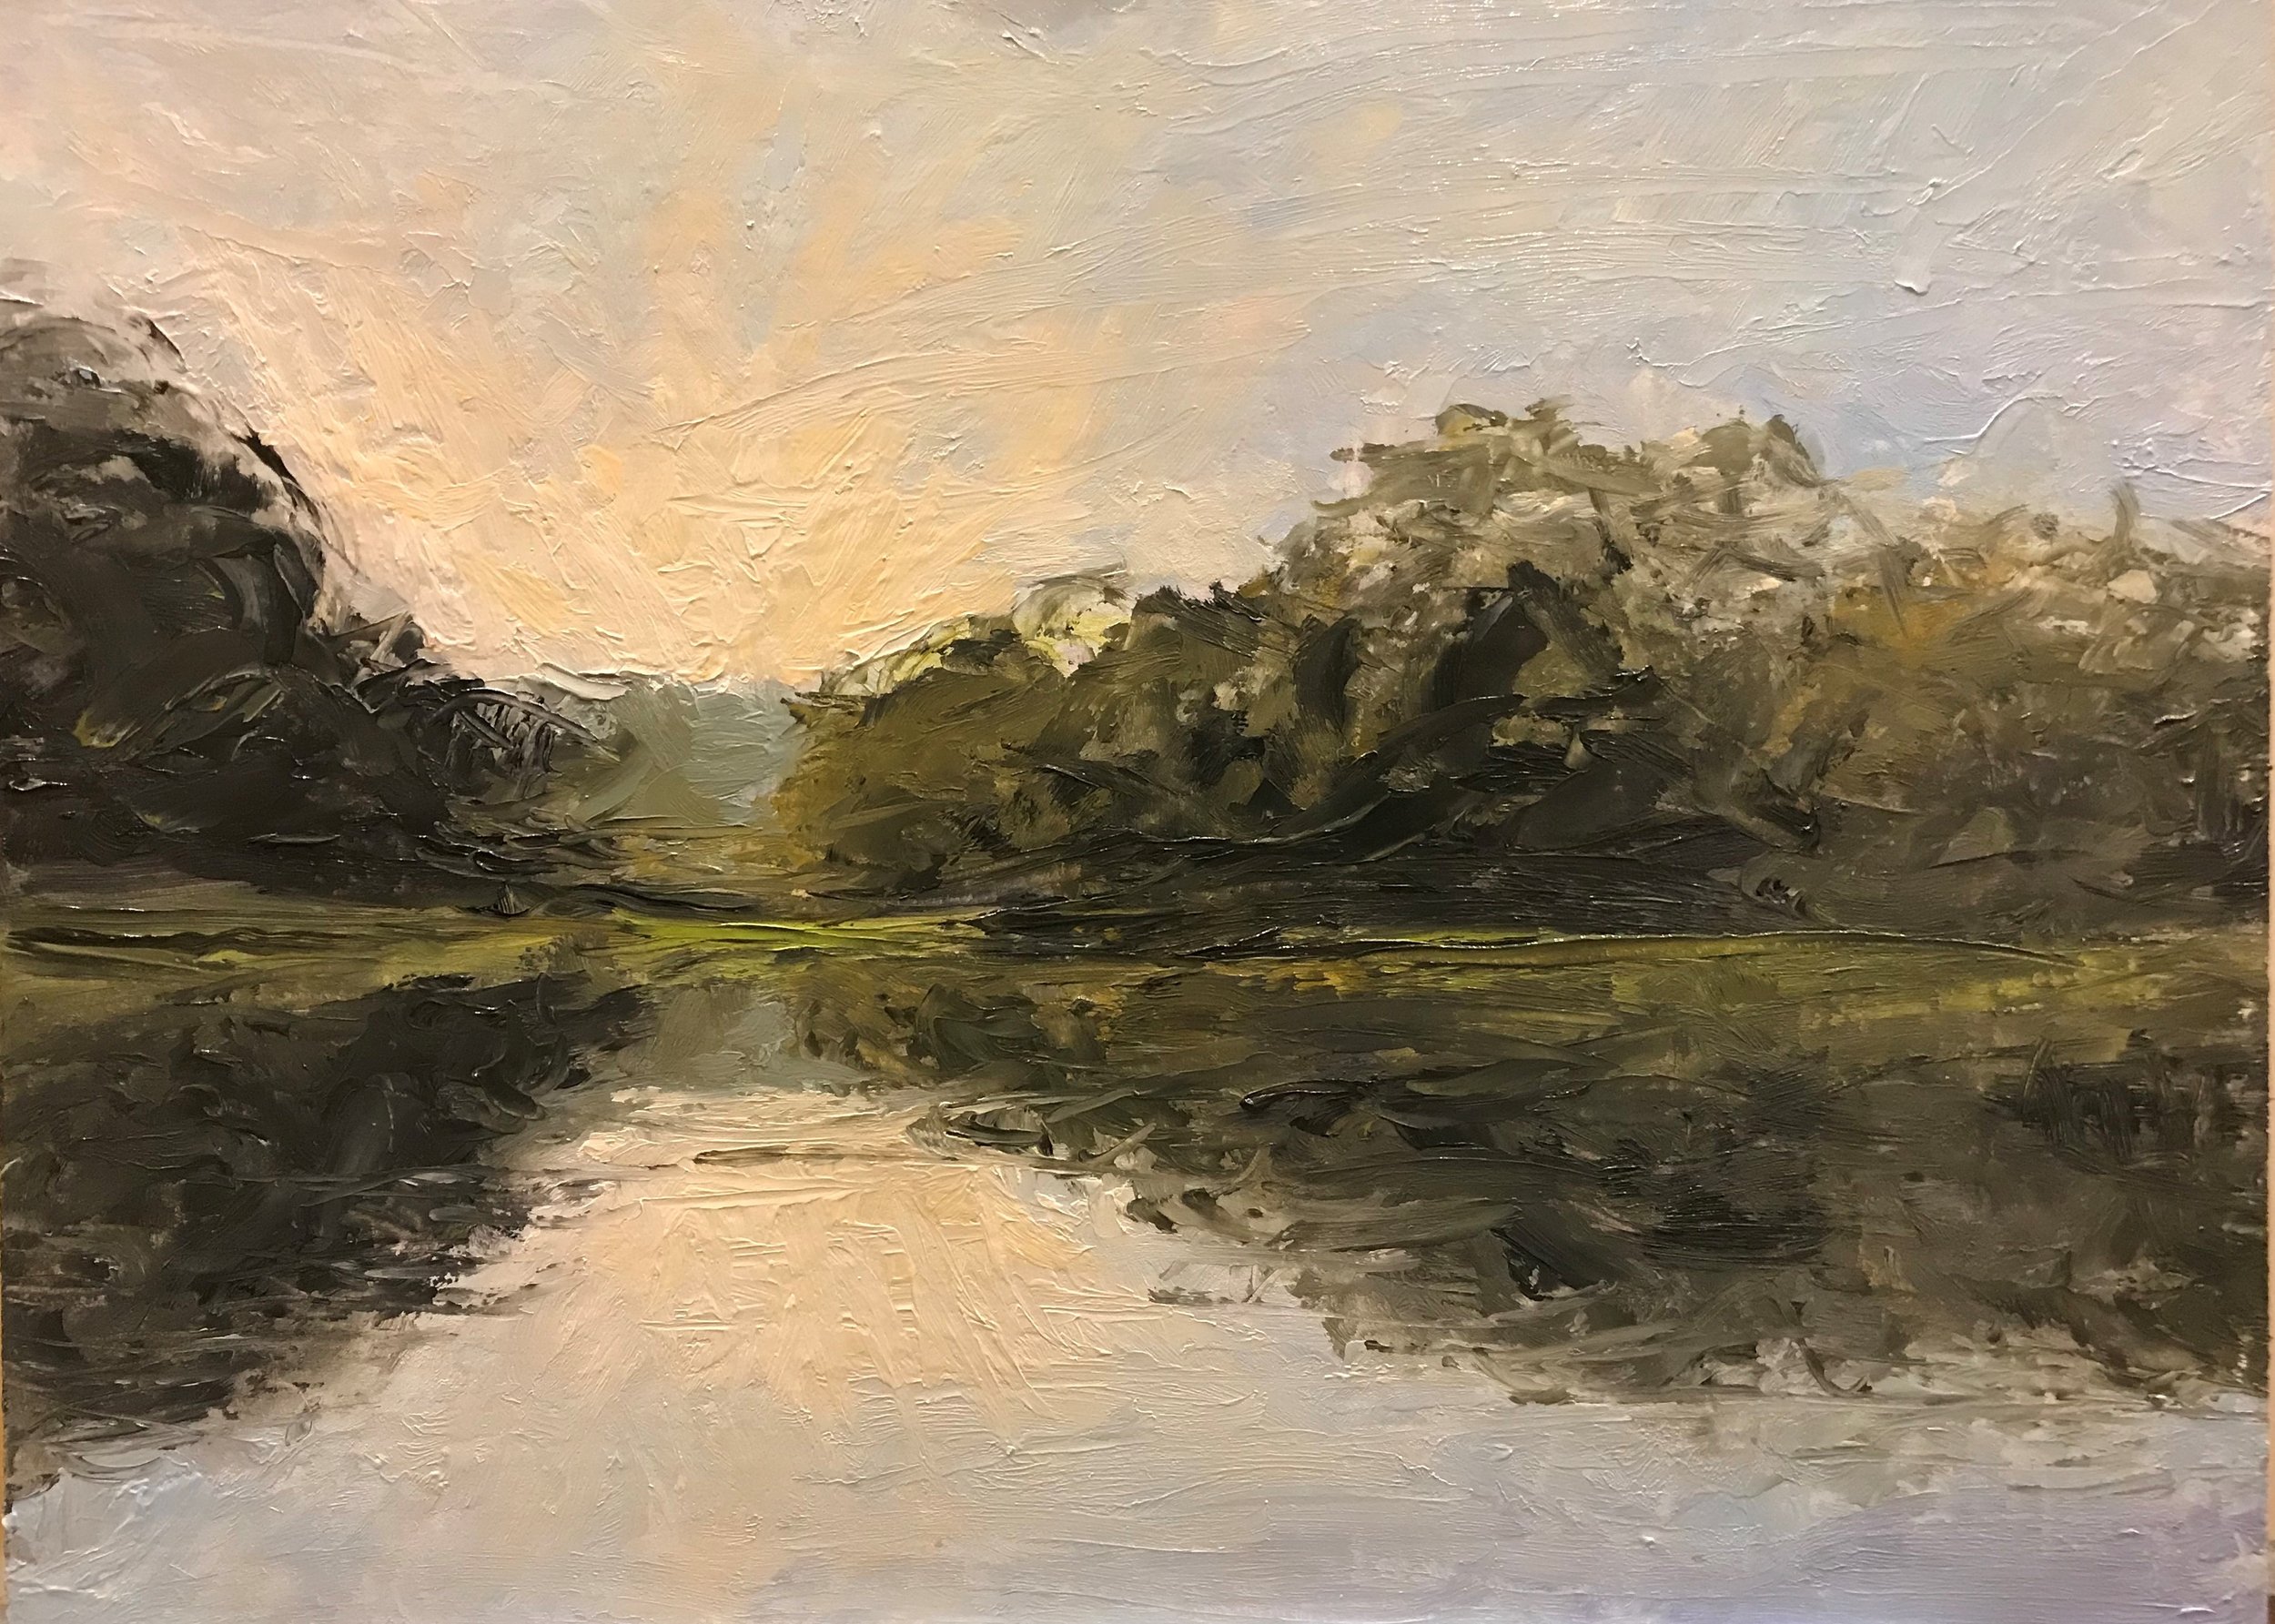 20-08-19 Back to the CrabbingHole  OIl on Panel  9 x 12.jpg